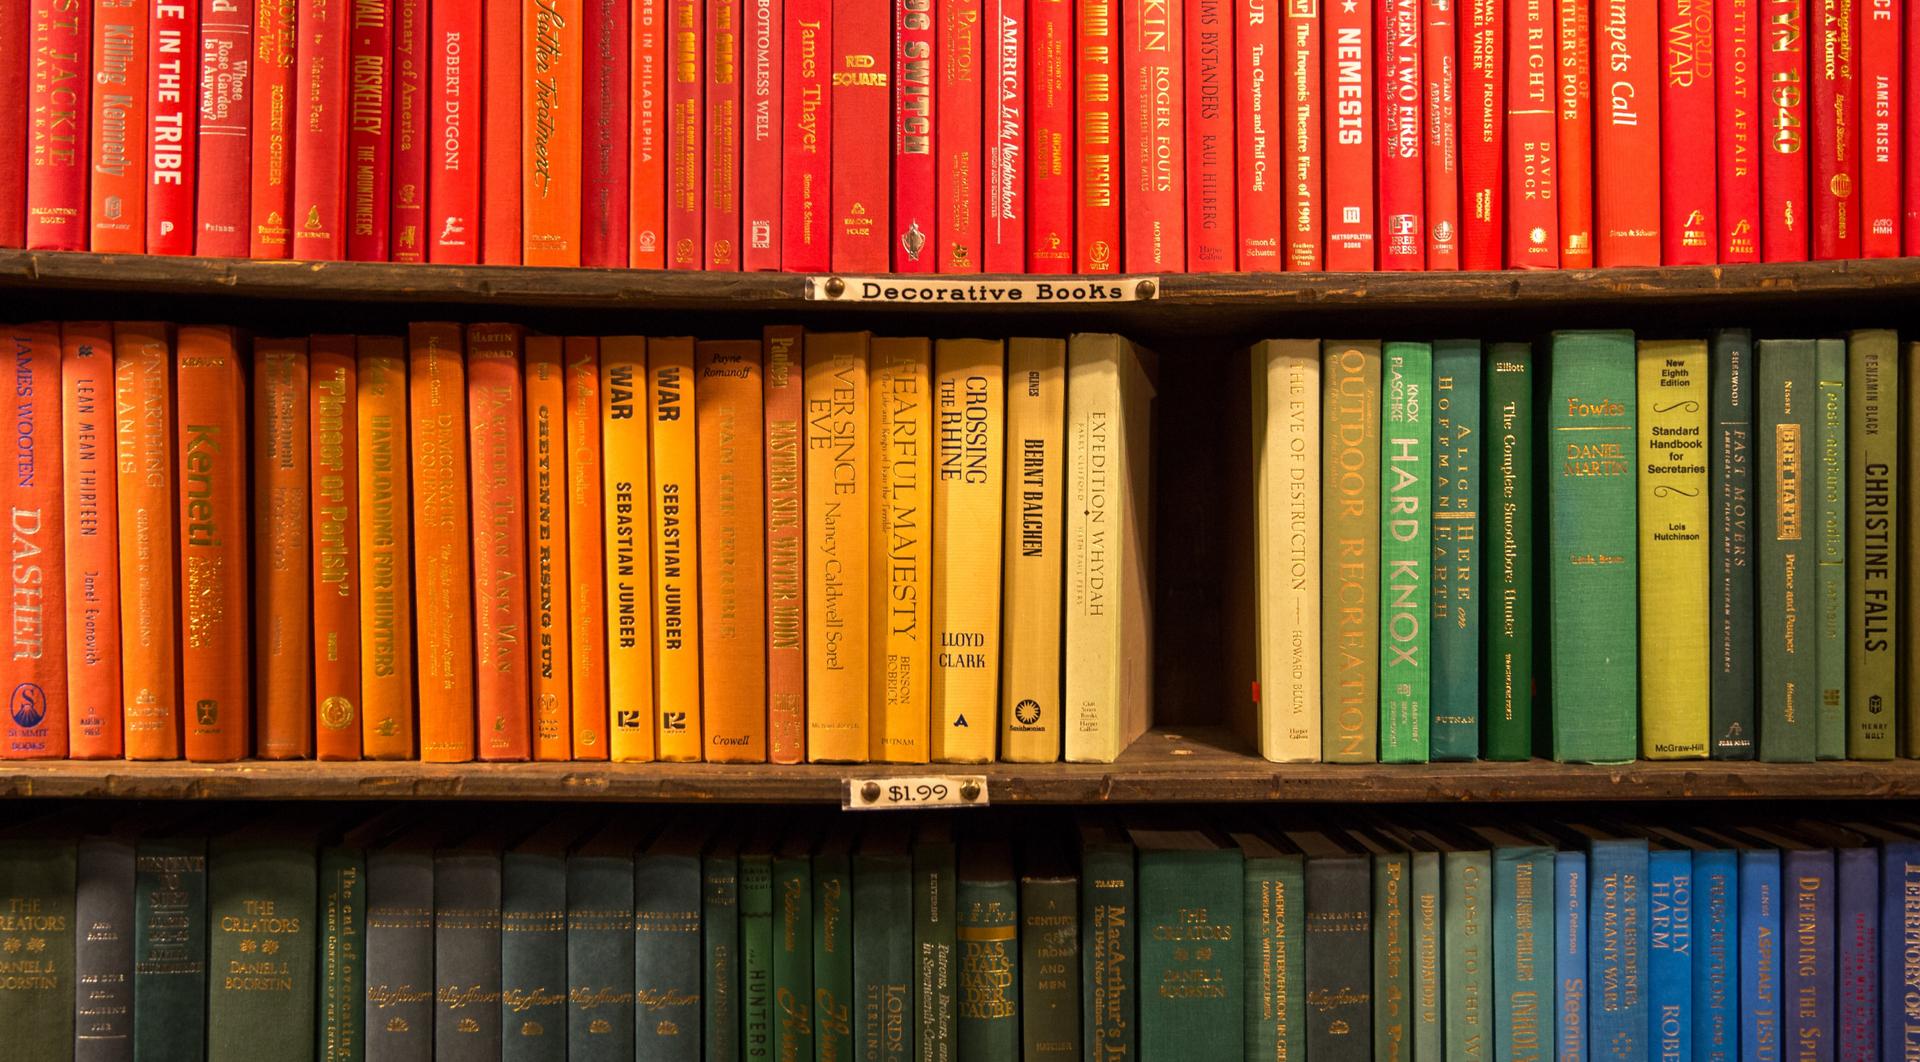 Three shelves of books organized by their cover colors